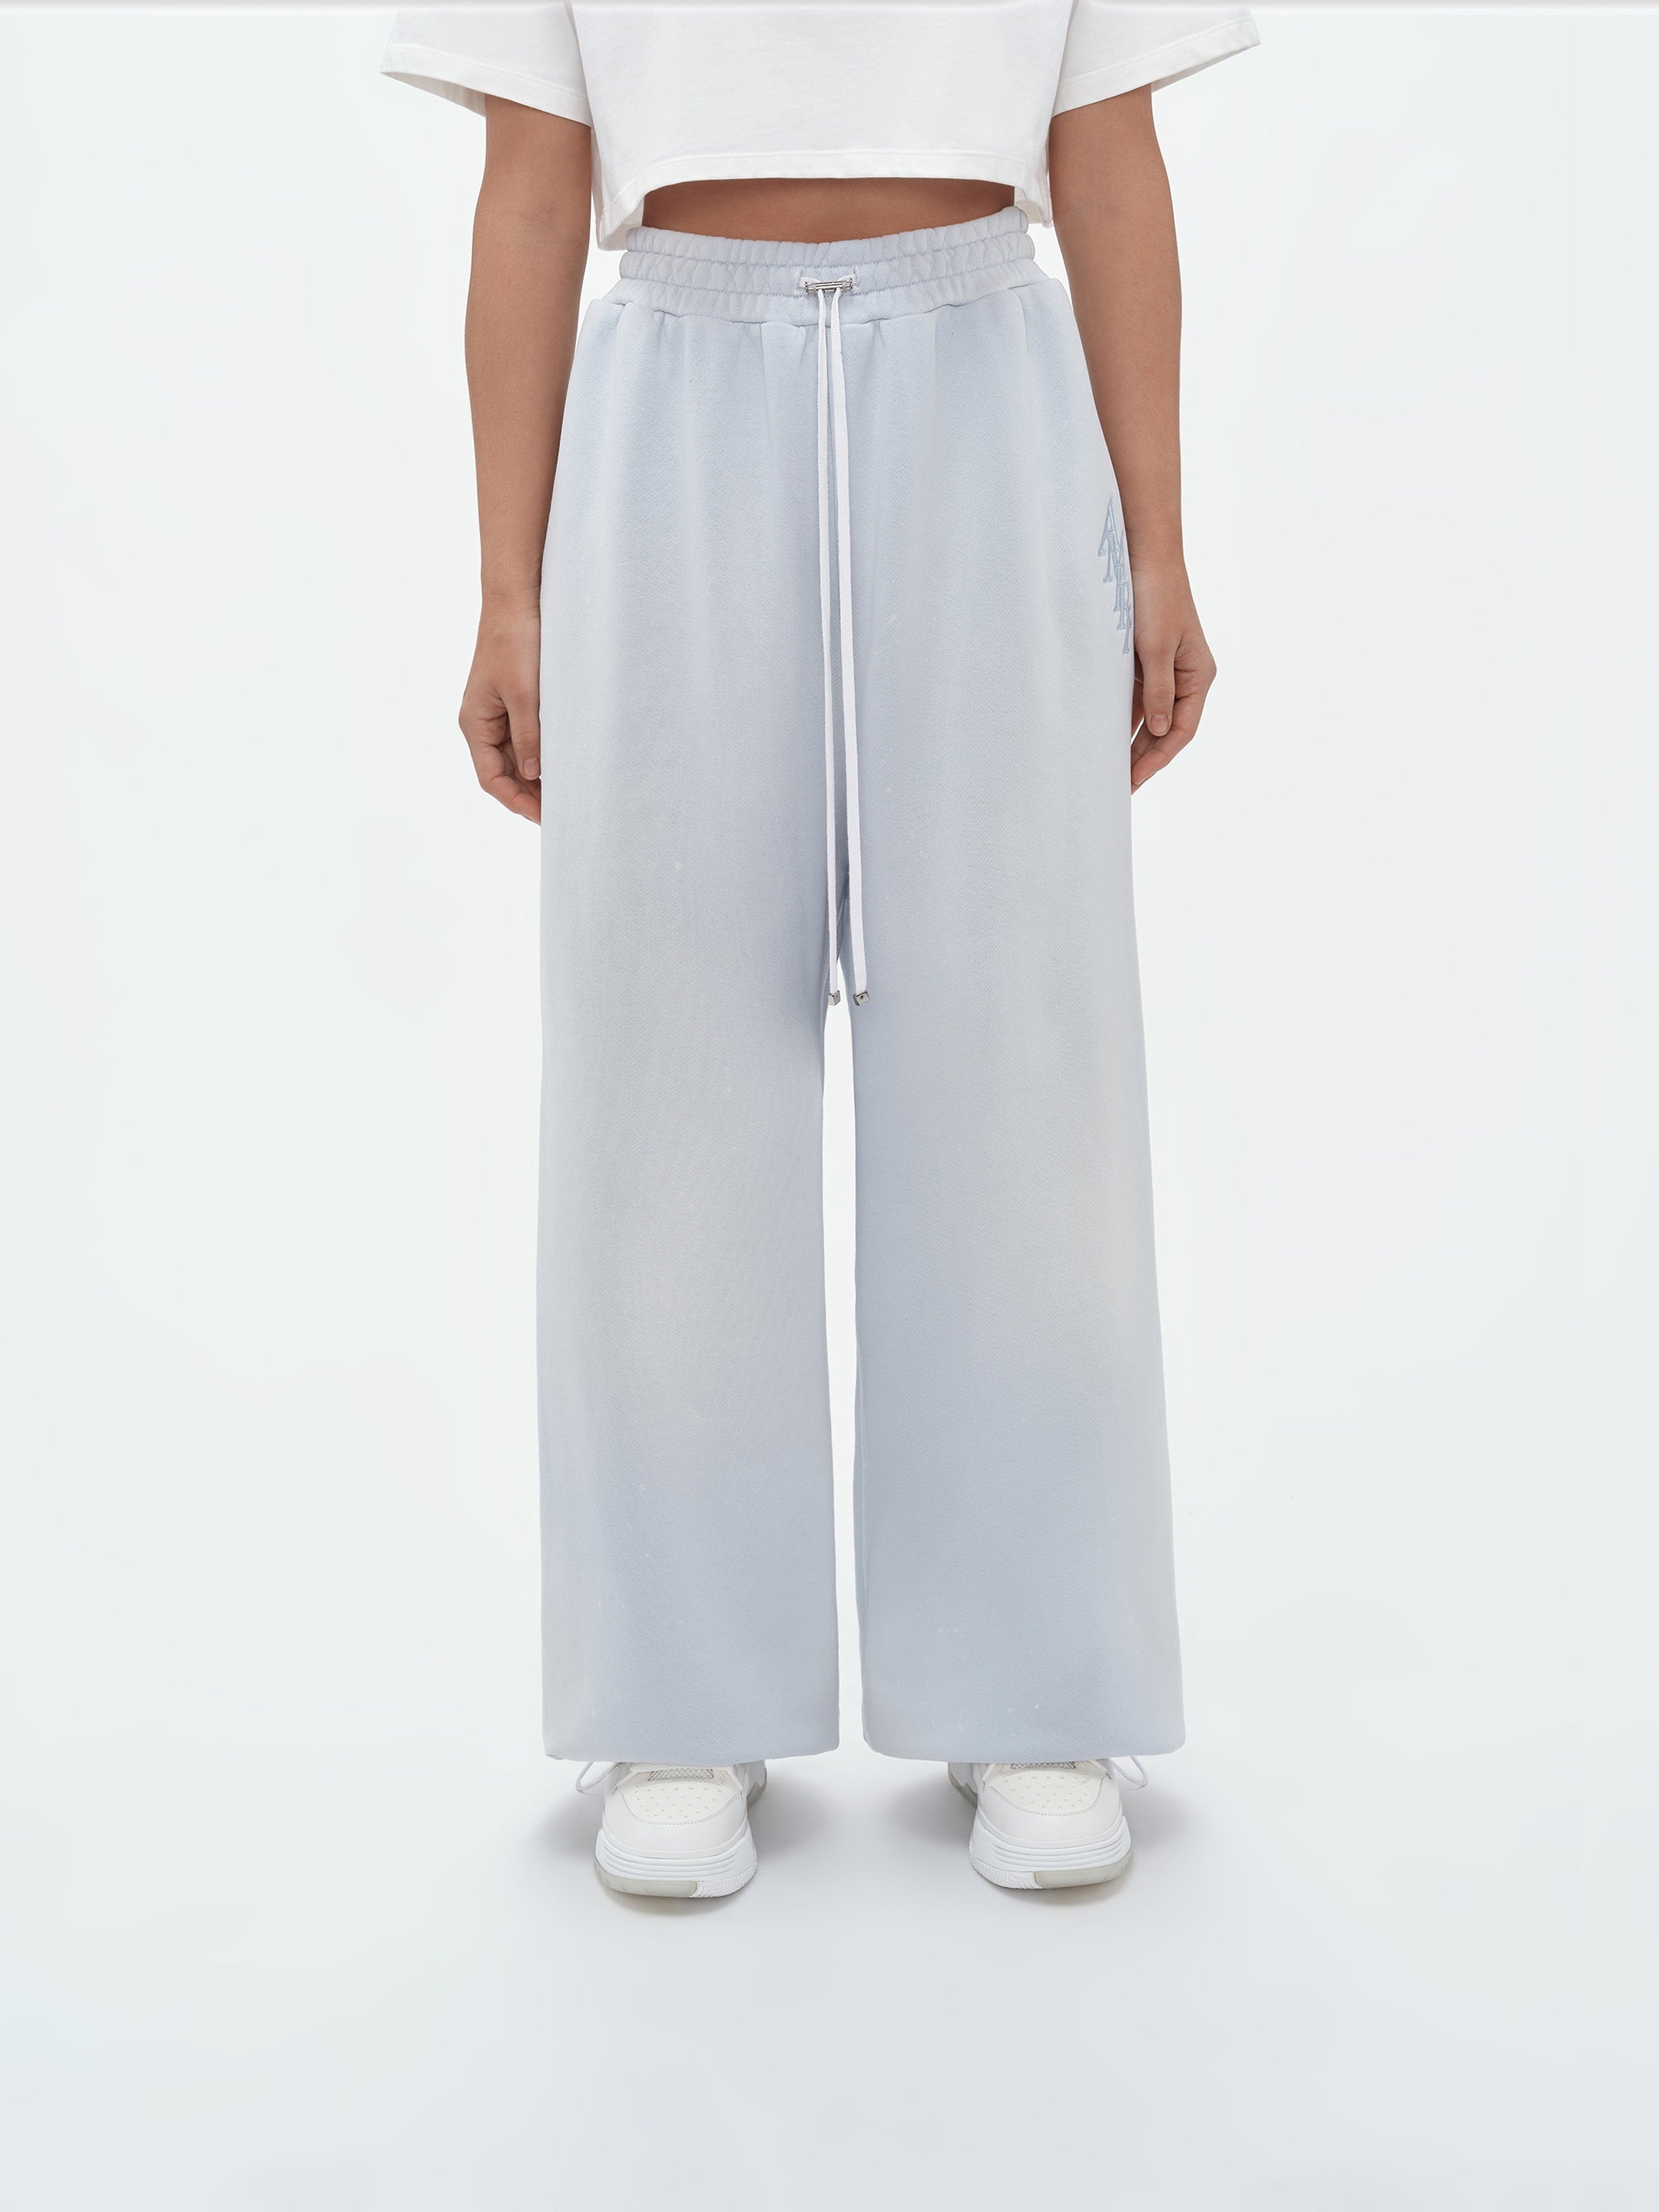 Product WOMEN - STACKED AMIRI BAGGY SWEATPANT - Gray Dawn featured image